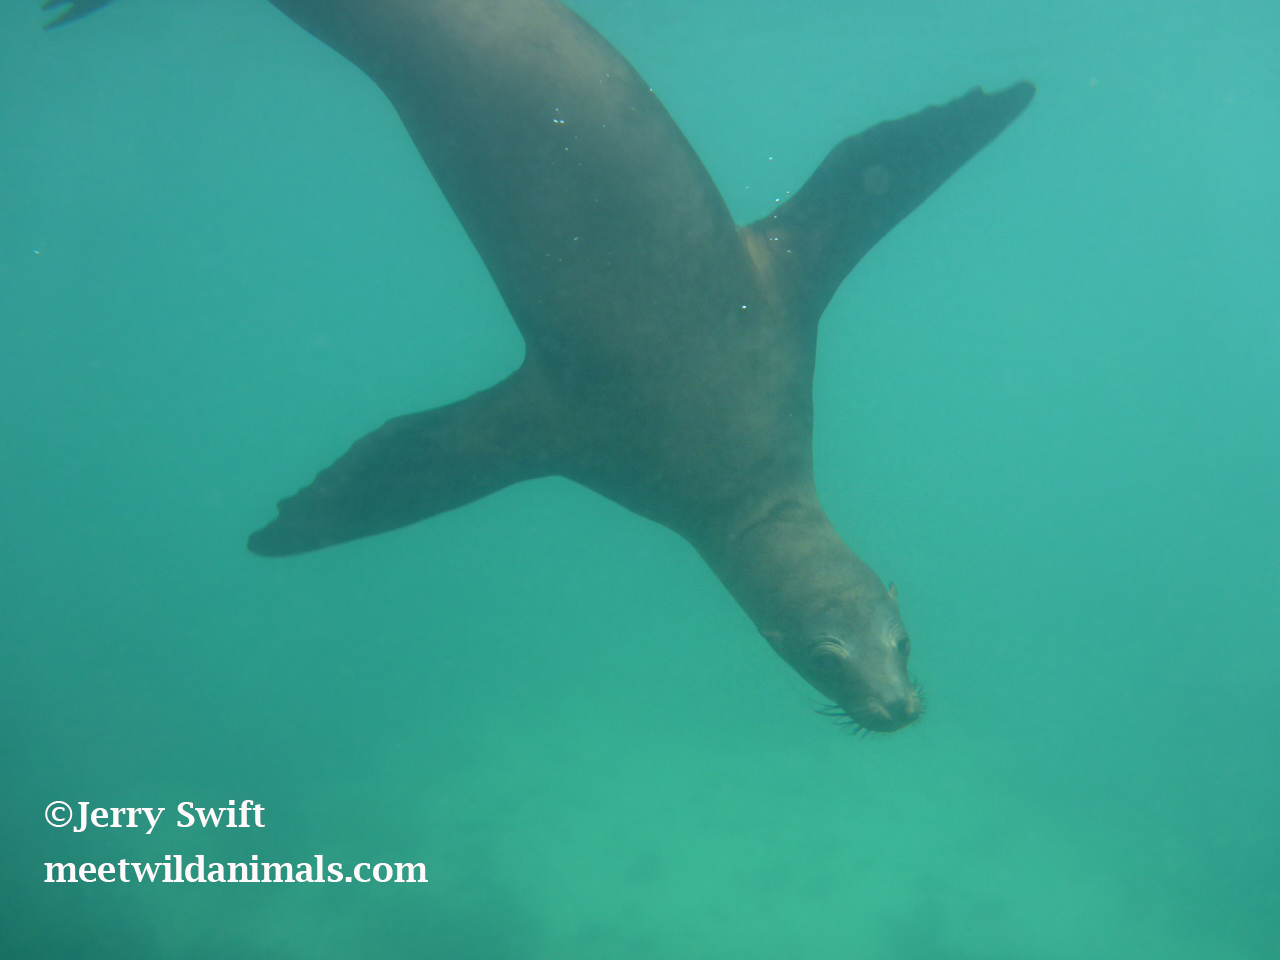 meilleures iles galapagos observation animaux